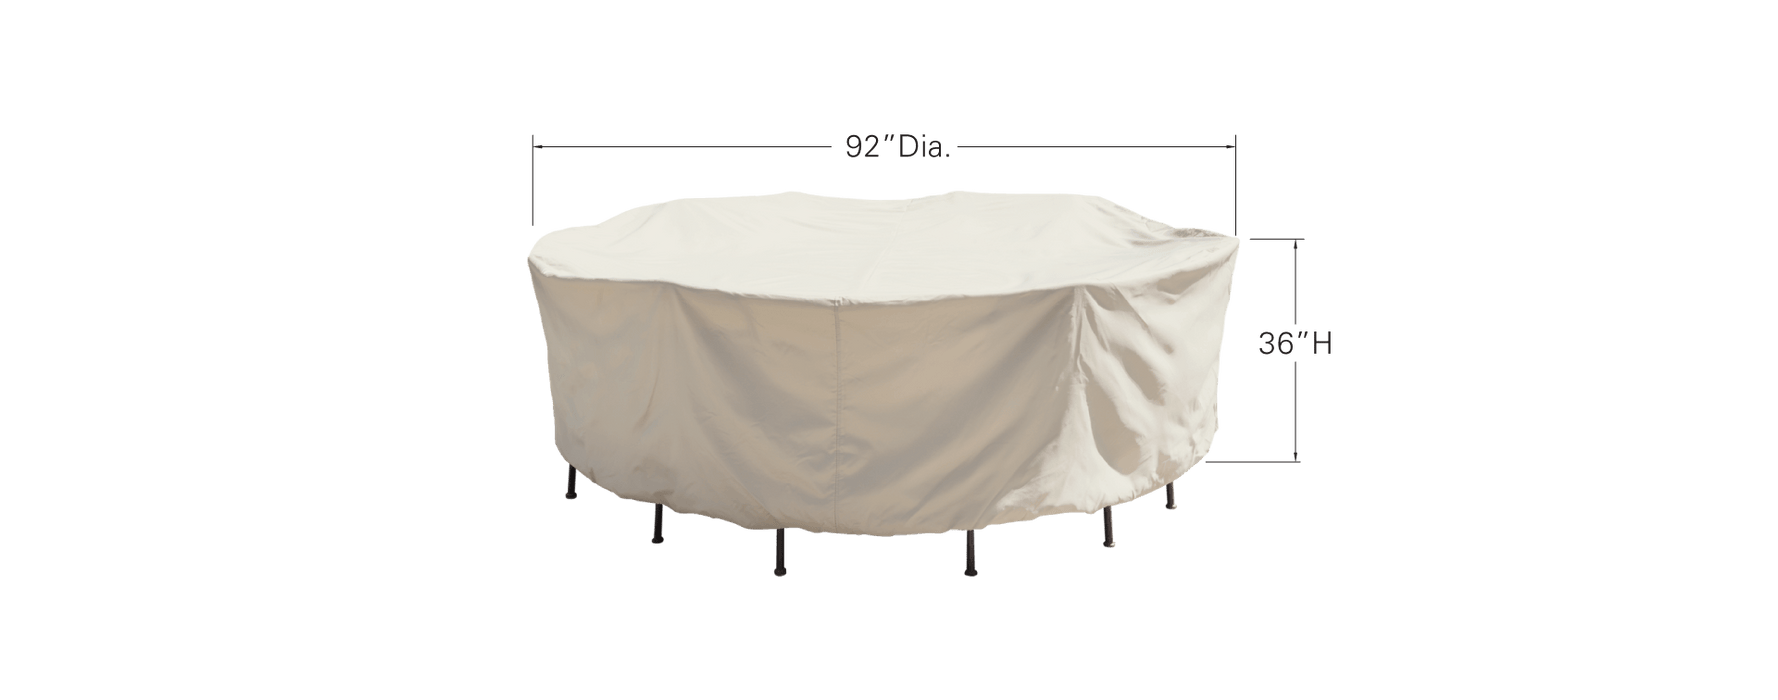 54" Round/Square Table and Chair Cover